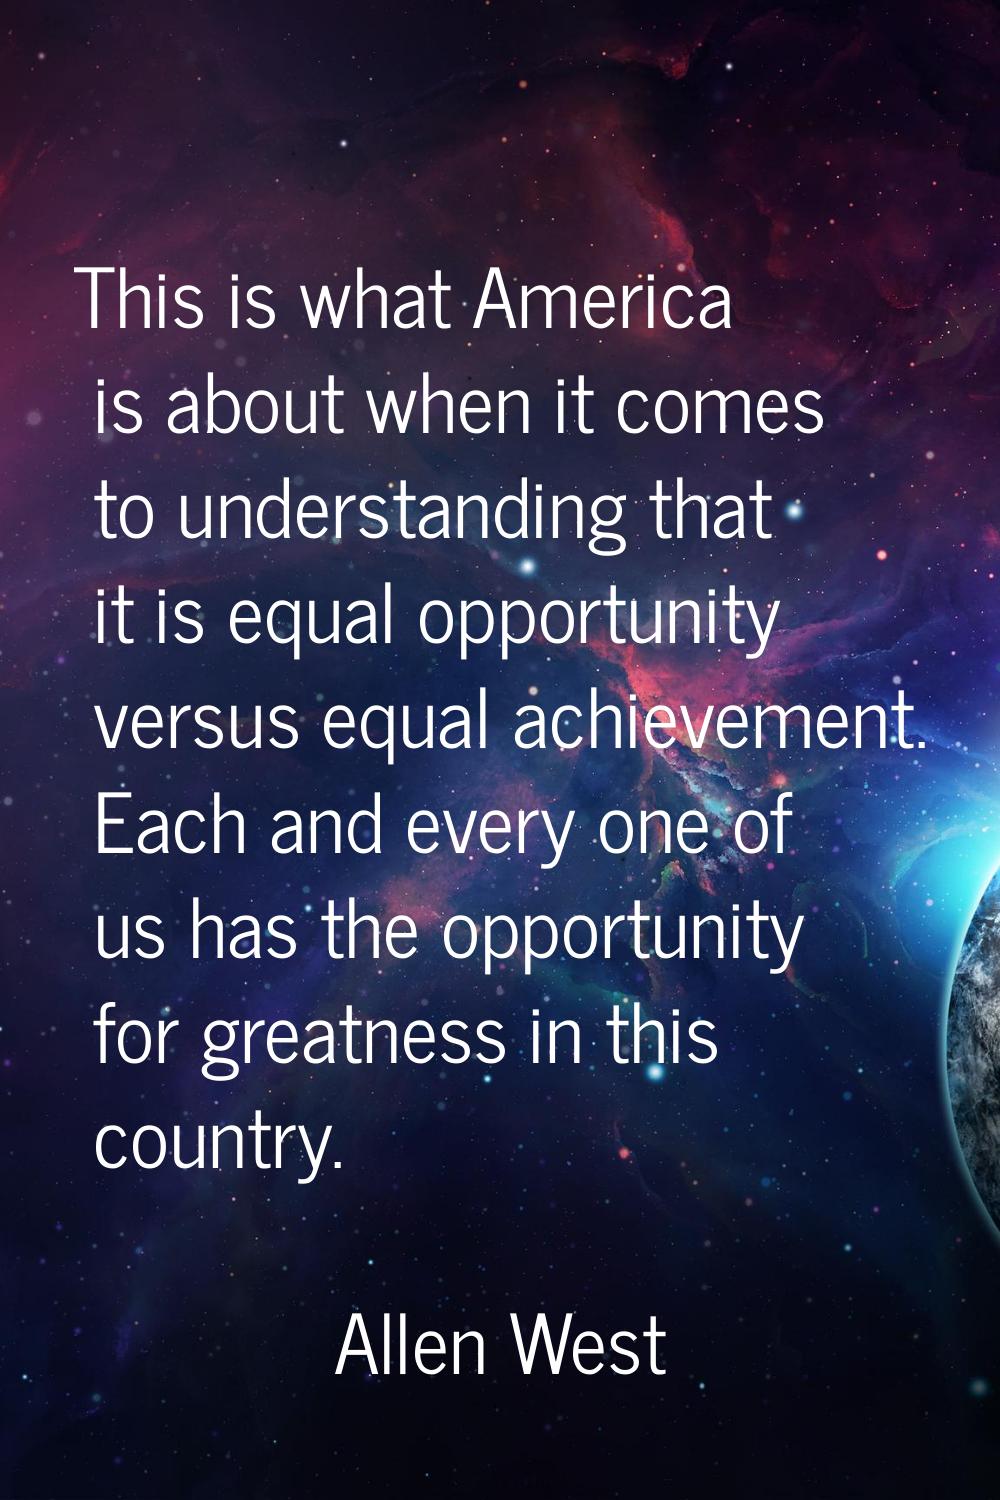 This is what America is about when it comes to understanding that it is equal opportunity versus eq